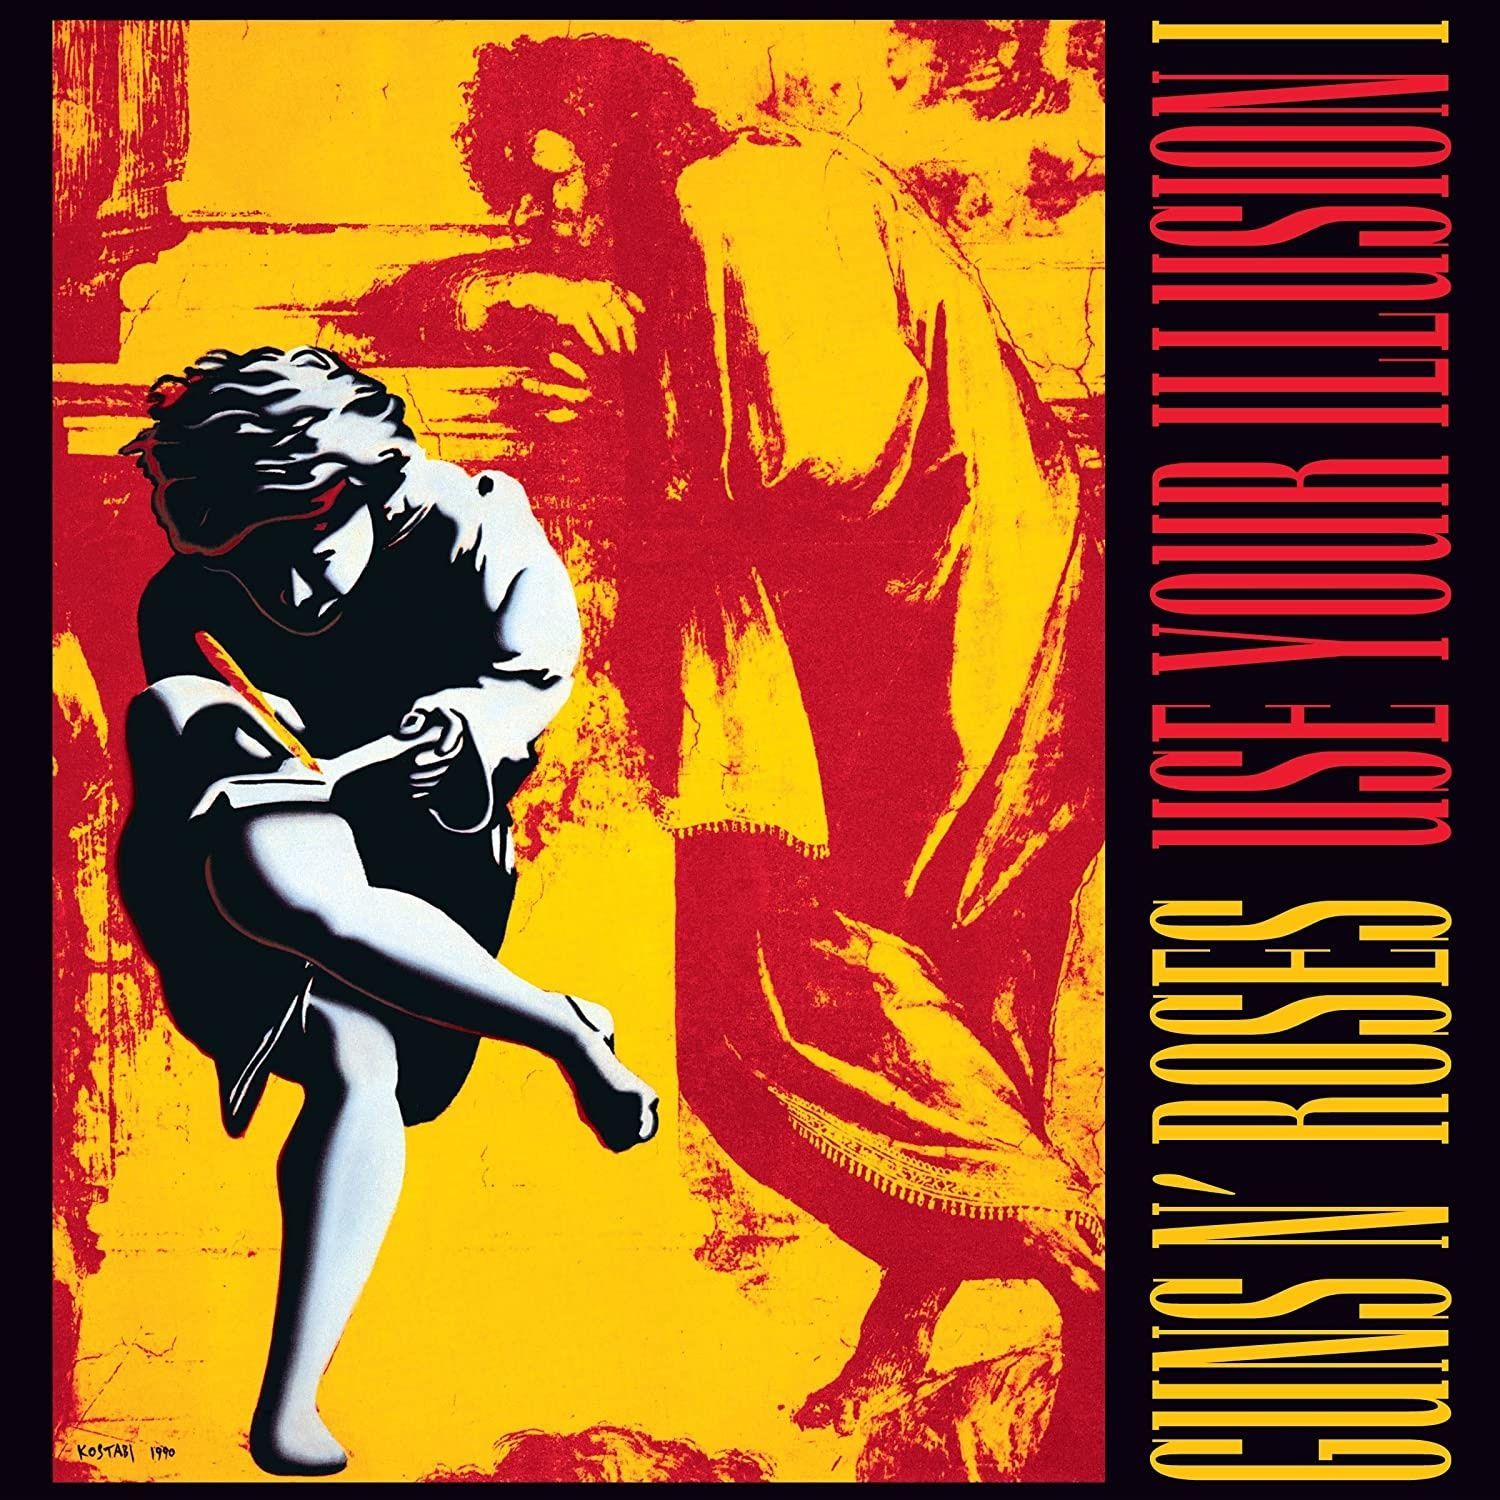 GUNS N' ROSES - USE YOUR ILLUSION I (DELUXE) (2 CD)